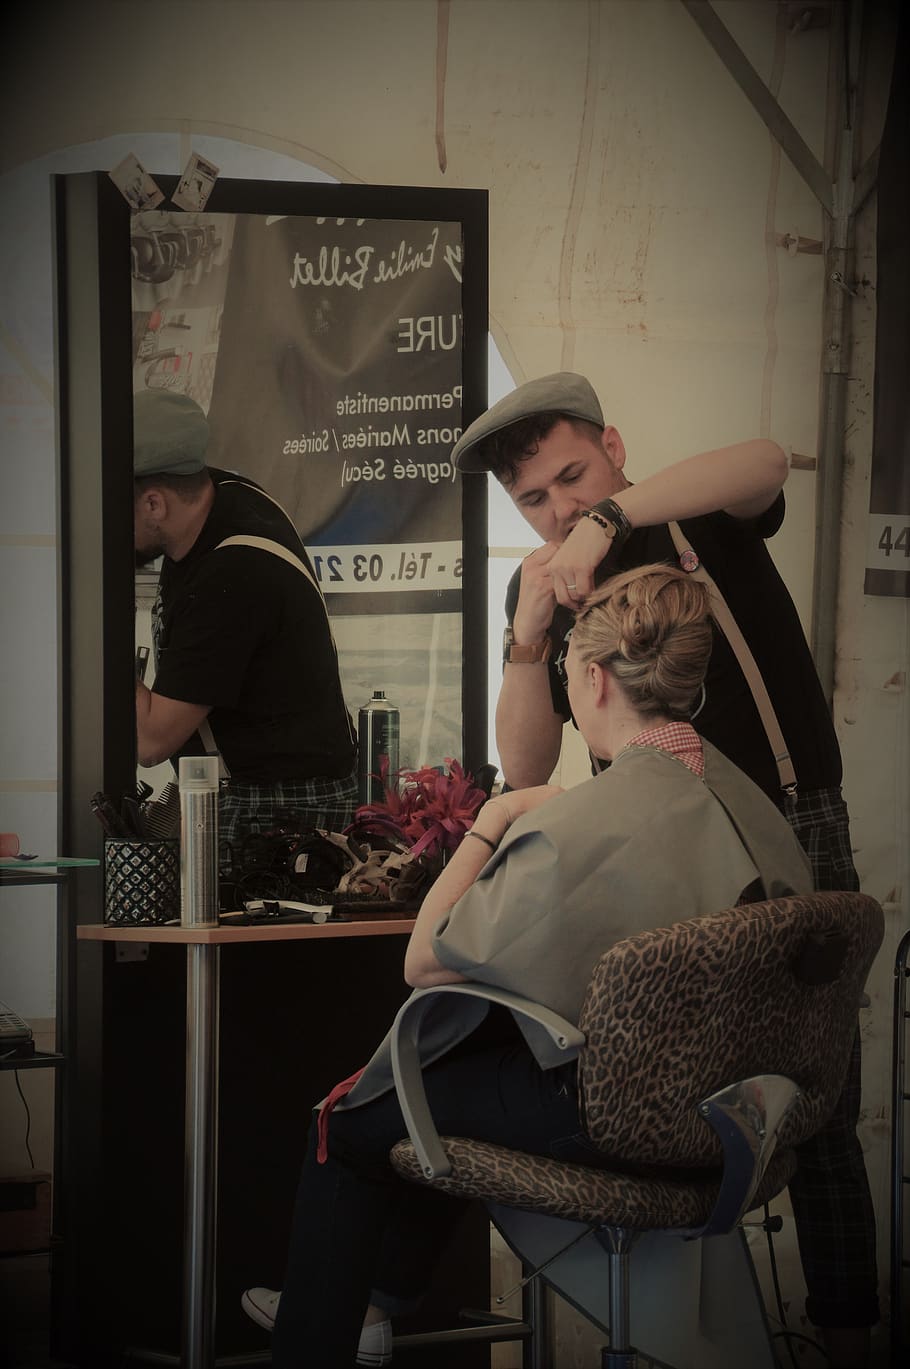 barber, hairstyle, scissors, hairdresser, old, style, retro, vintage, nostalgia, real people